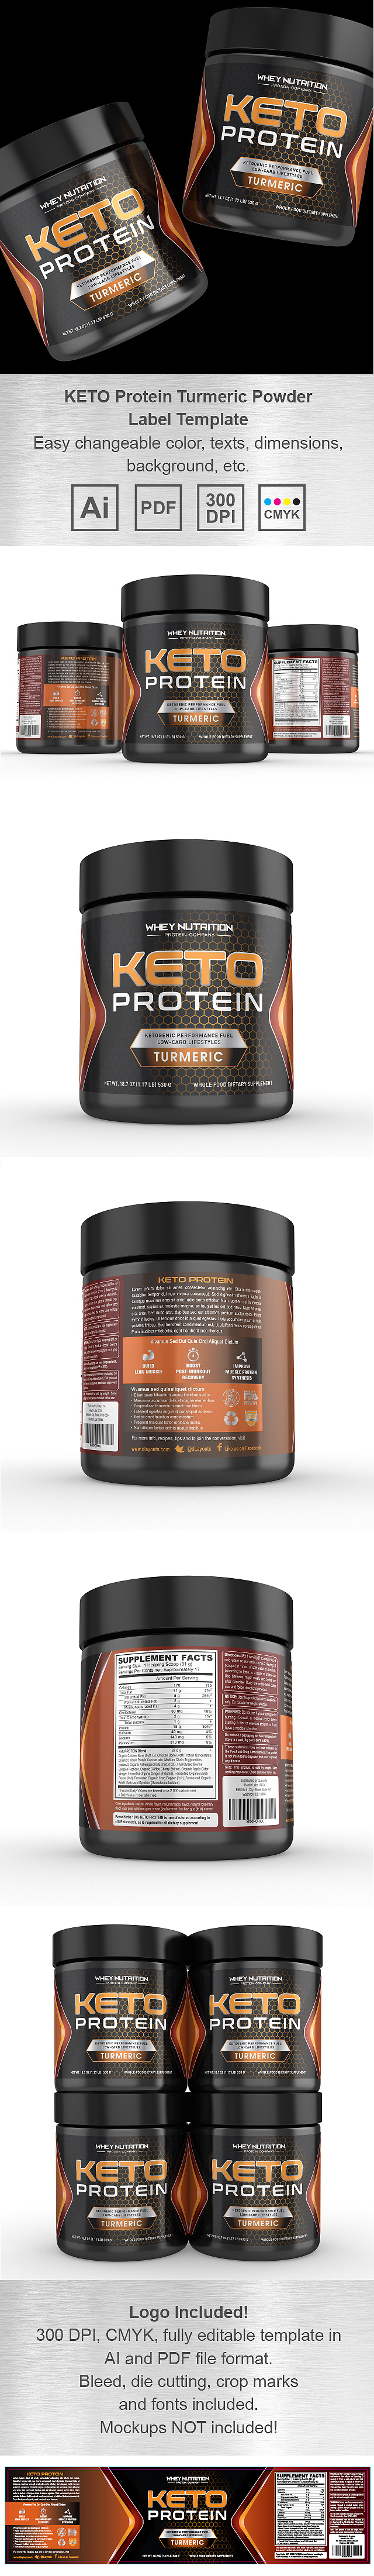 KETO Protein Turmeric Powder Supplement Label Template